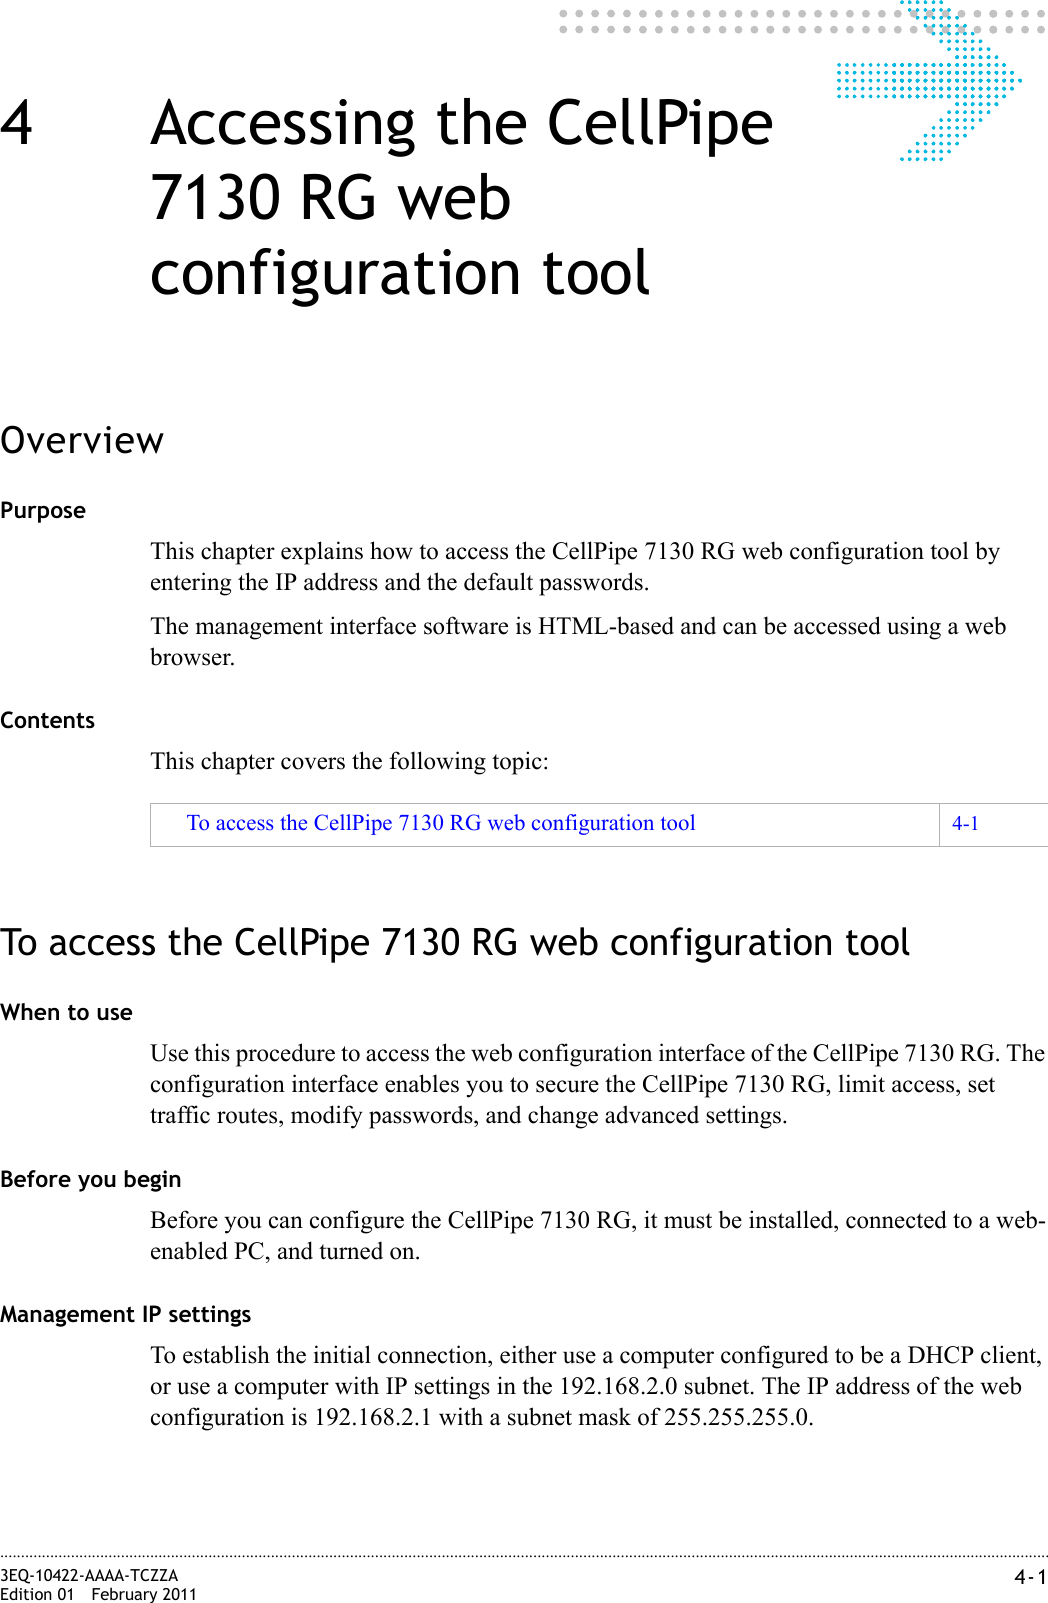 4-13EQ-10422-AAAA-TCZZAEdition 01 February 2011............................................................................................................................................................................................................................................................4 Accessing the CellPipe 7130 RG web configuration toolOverviewPurposeThis chapter explains how to access the CellPipe 7130 RG web configuration tool by entering the IP address and the default passwords.The management interface software is HTML-based and can be accessed using a web browser.ContentsThis chapter covers the following topic:To access the CellPipe 7130 RG web configuration toolWhen to useUse this procedure to access the web configuration interface of the CellPipe 7130 RG. The configuration interface enables you to secure the CellPipe 7130 RG, limit access, set traffic routes, modify passwords, and change advanced settings.Before you beginBefore you can configure the CellPipe 7130 RG, it must be installed, connected to a web-enabled PC, and turned on.Management IP settingsTo establish the initial connection, either use a computer configured to be a DHCP client, or use a computer with IP settings in the 192.168.2.0 subnet. The IP address of the web configuration is 192.168.2.1 with a subnet mask of 255.255.255.0.To access the CellPipe 7130 RG web configuration tool 4-1